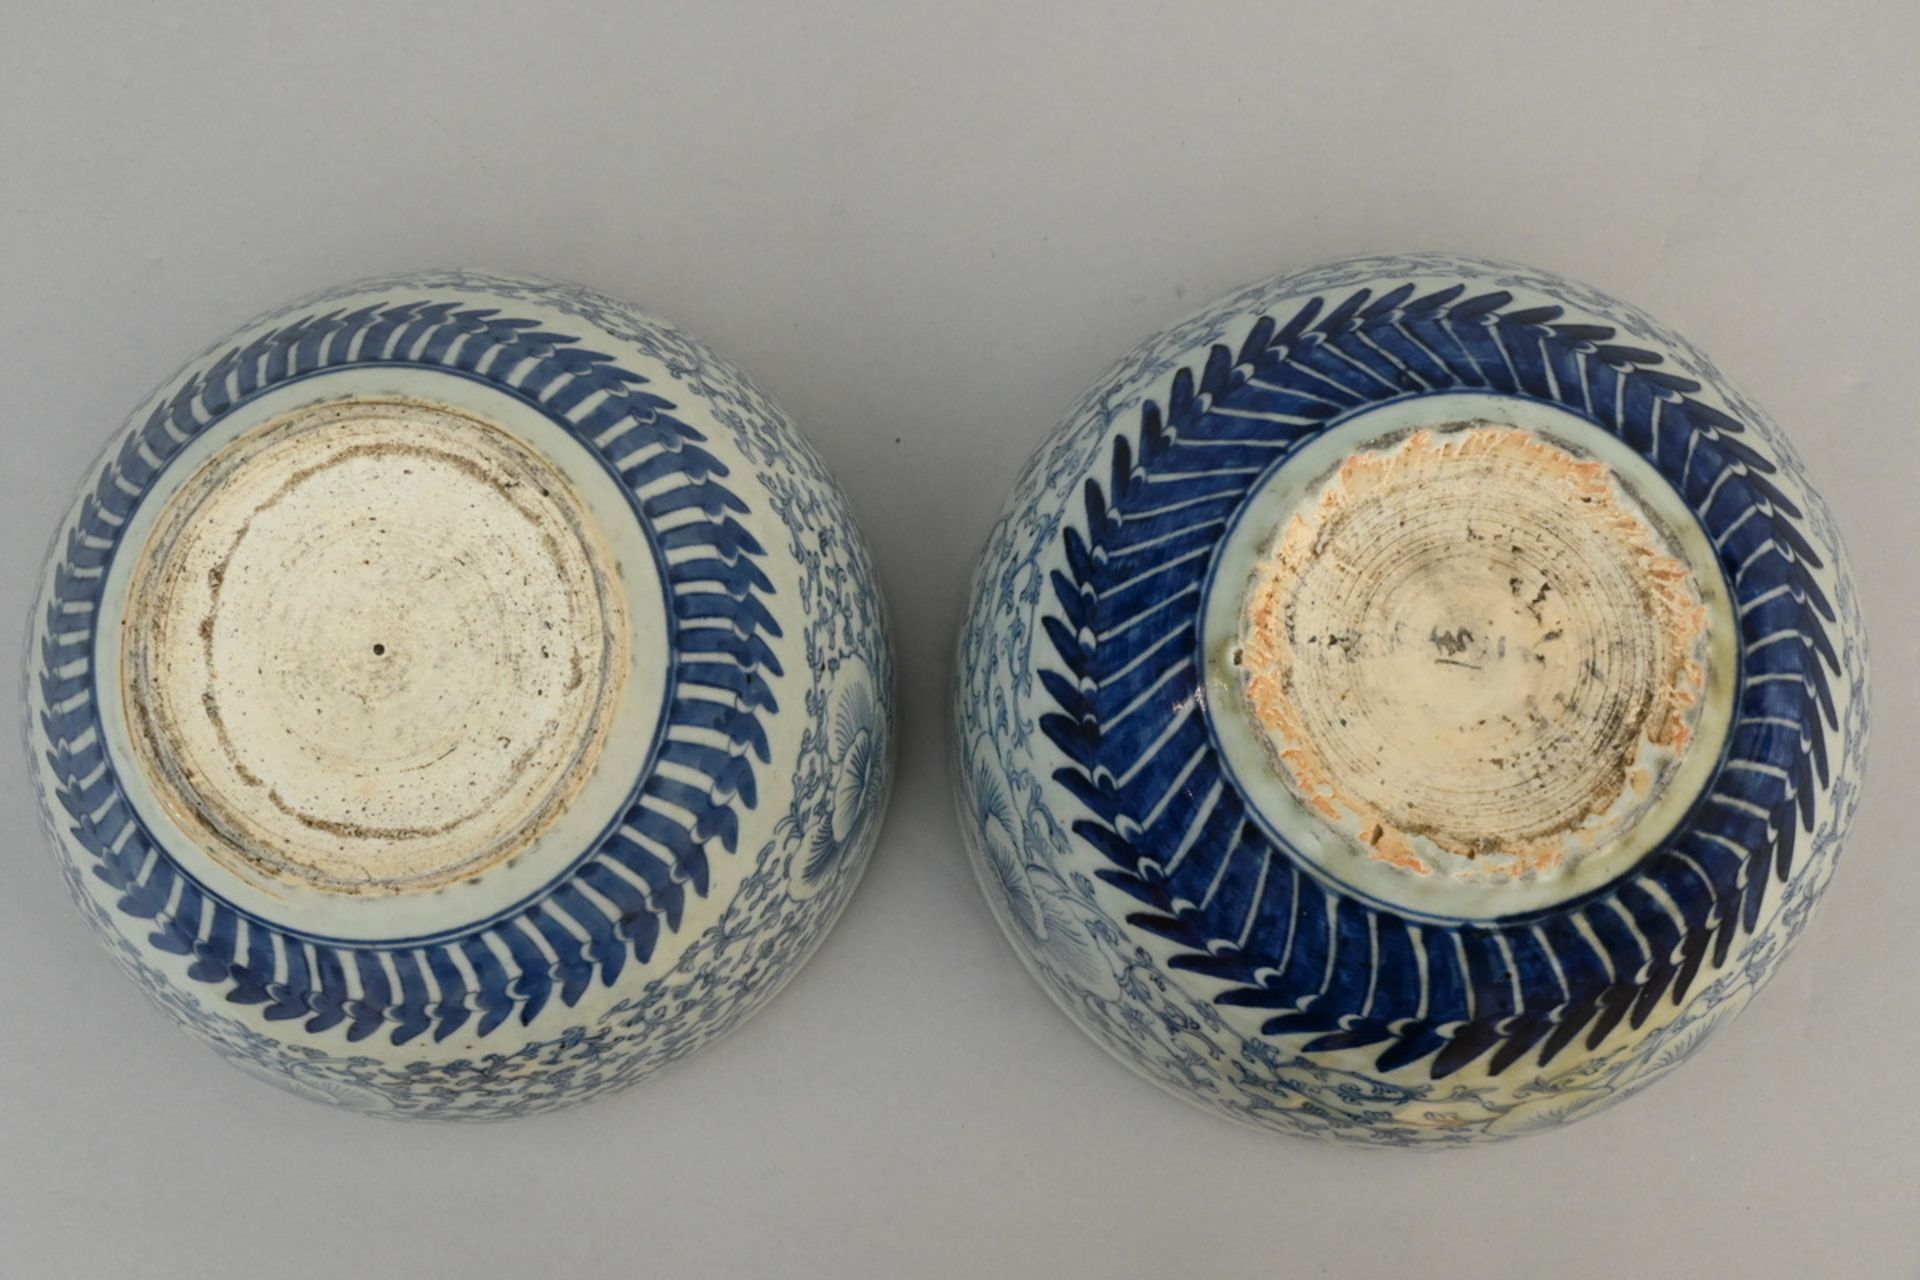 Two Chinese planters in blue and white porcelain, 19th century (dia 26-27.5cm) - Image 4 of 4